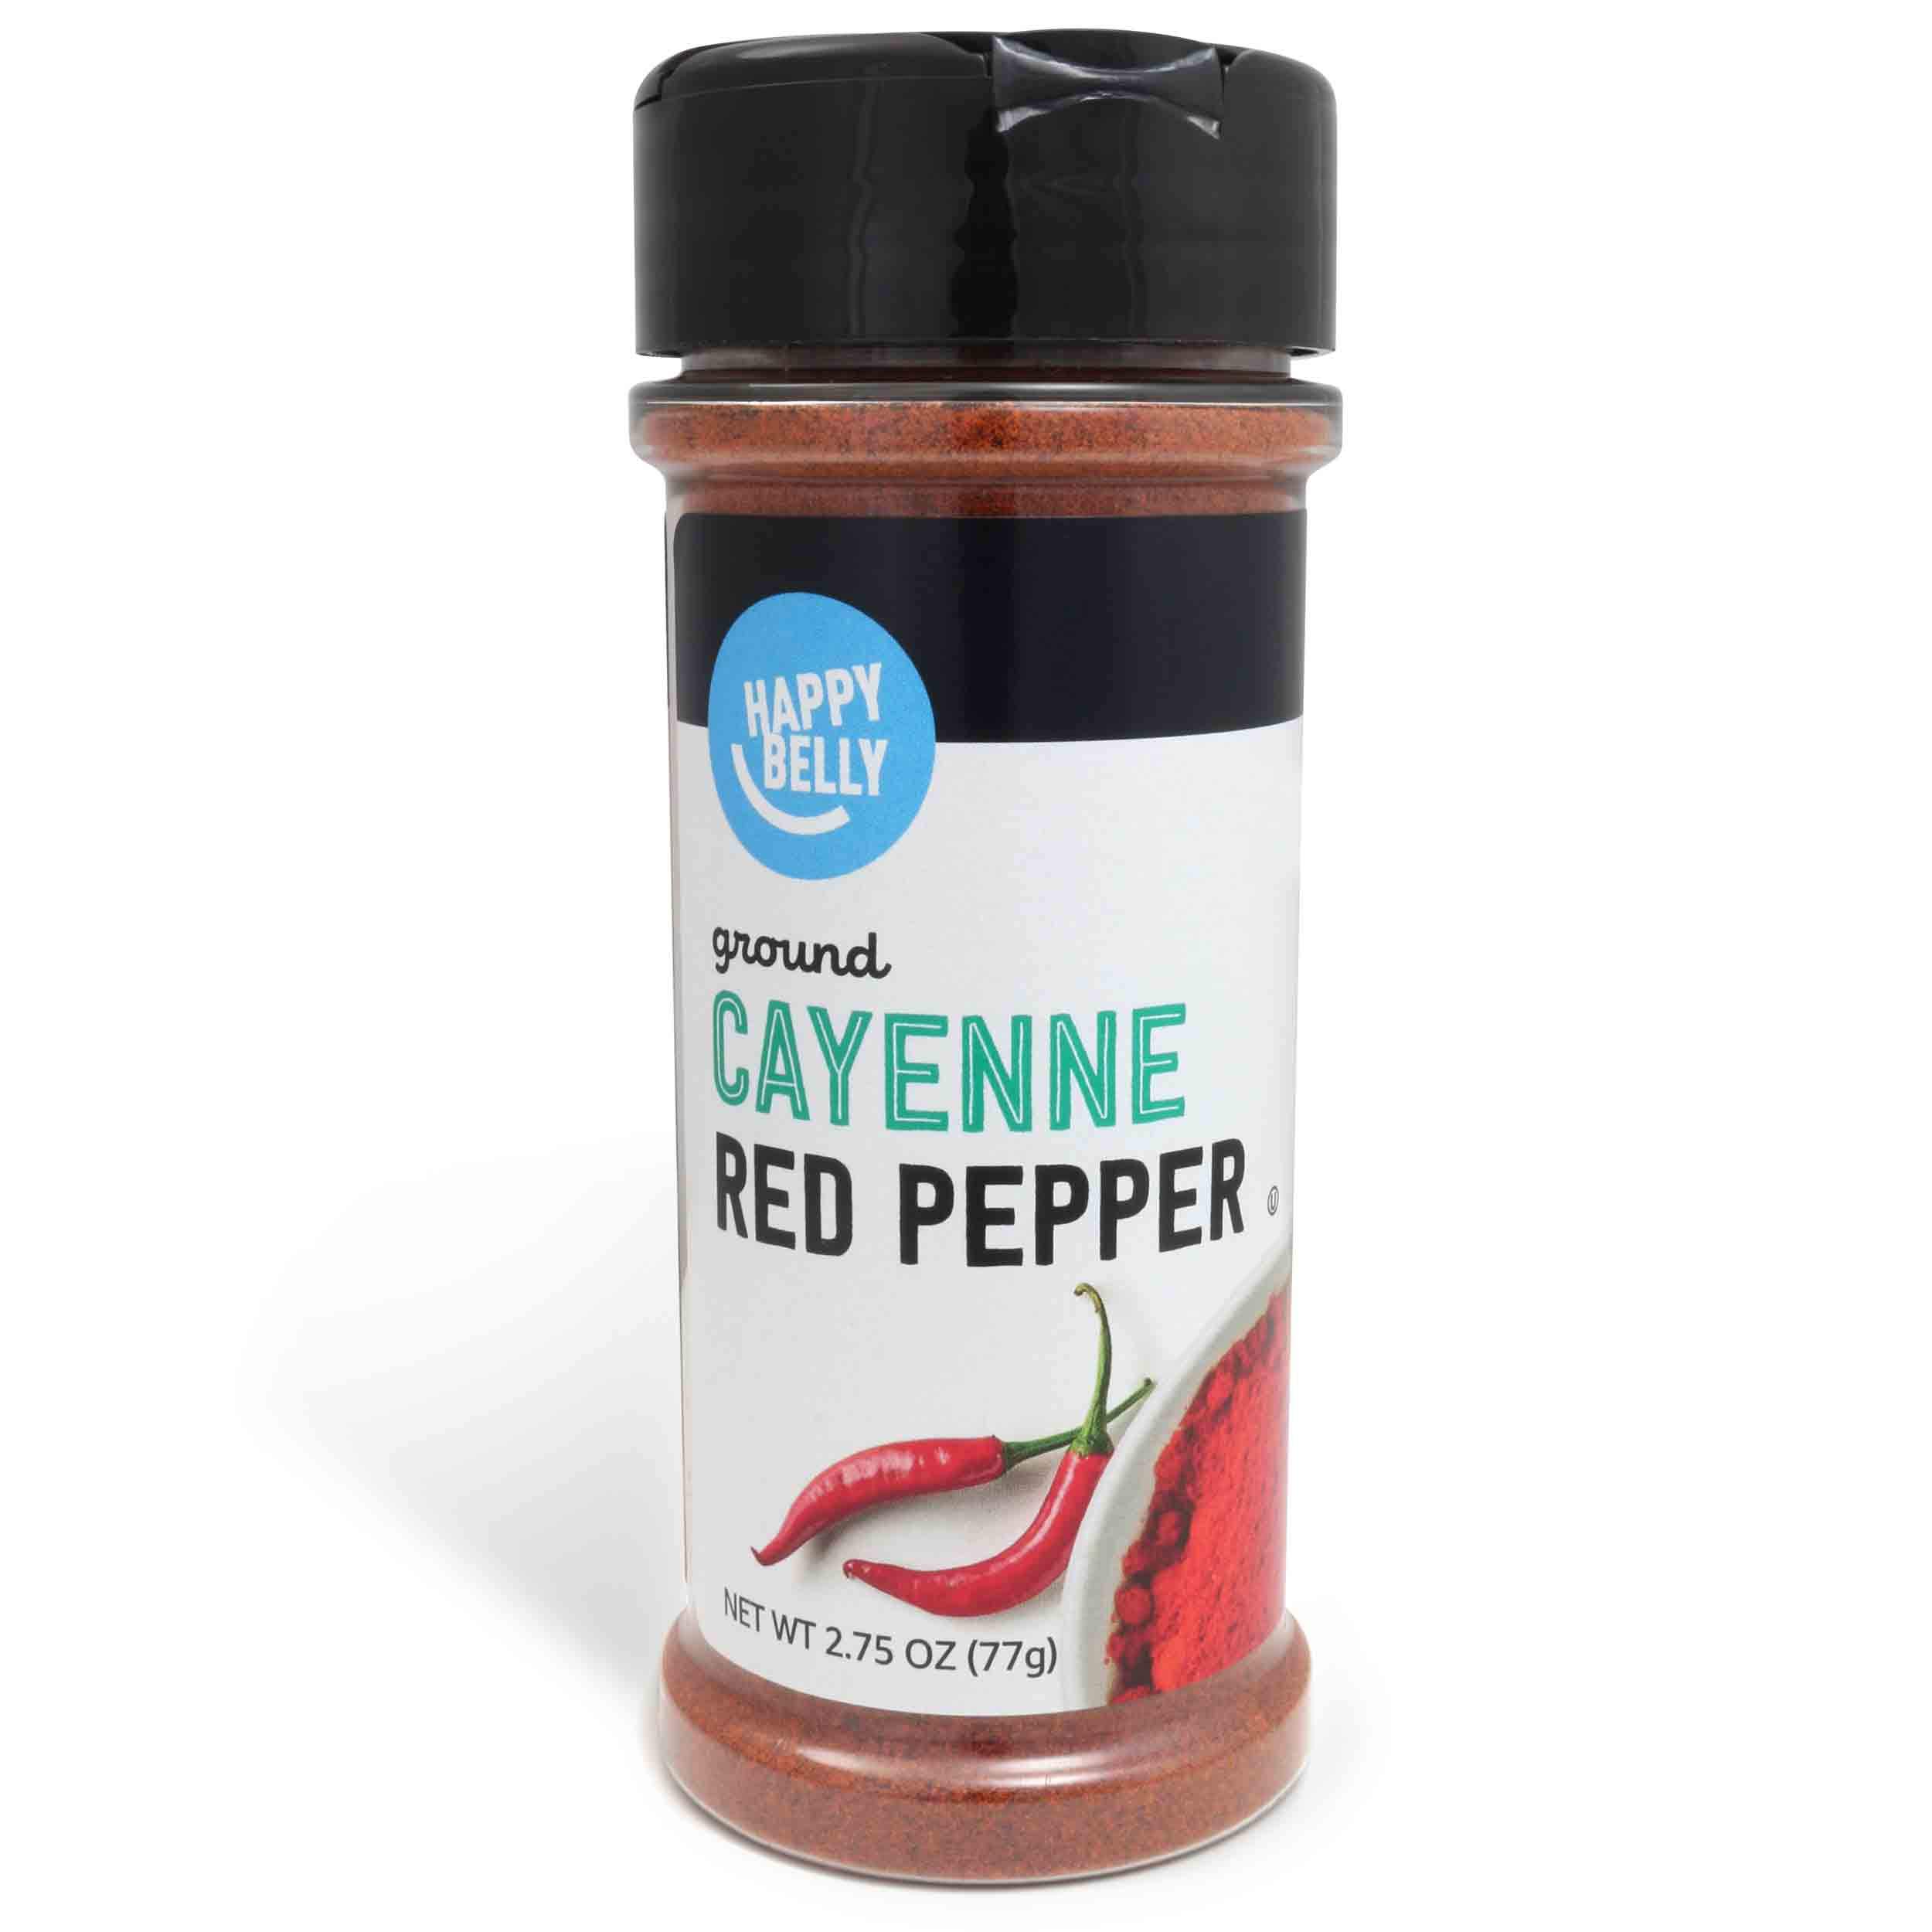 2.75-Oz Happy Belly Ground Cayenne Red Pepper $2.56 + Free Shipping w/ Prime or on orders over $35